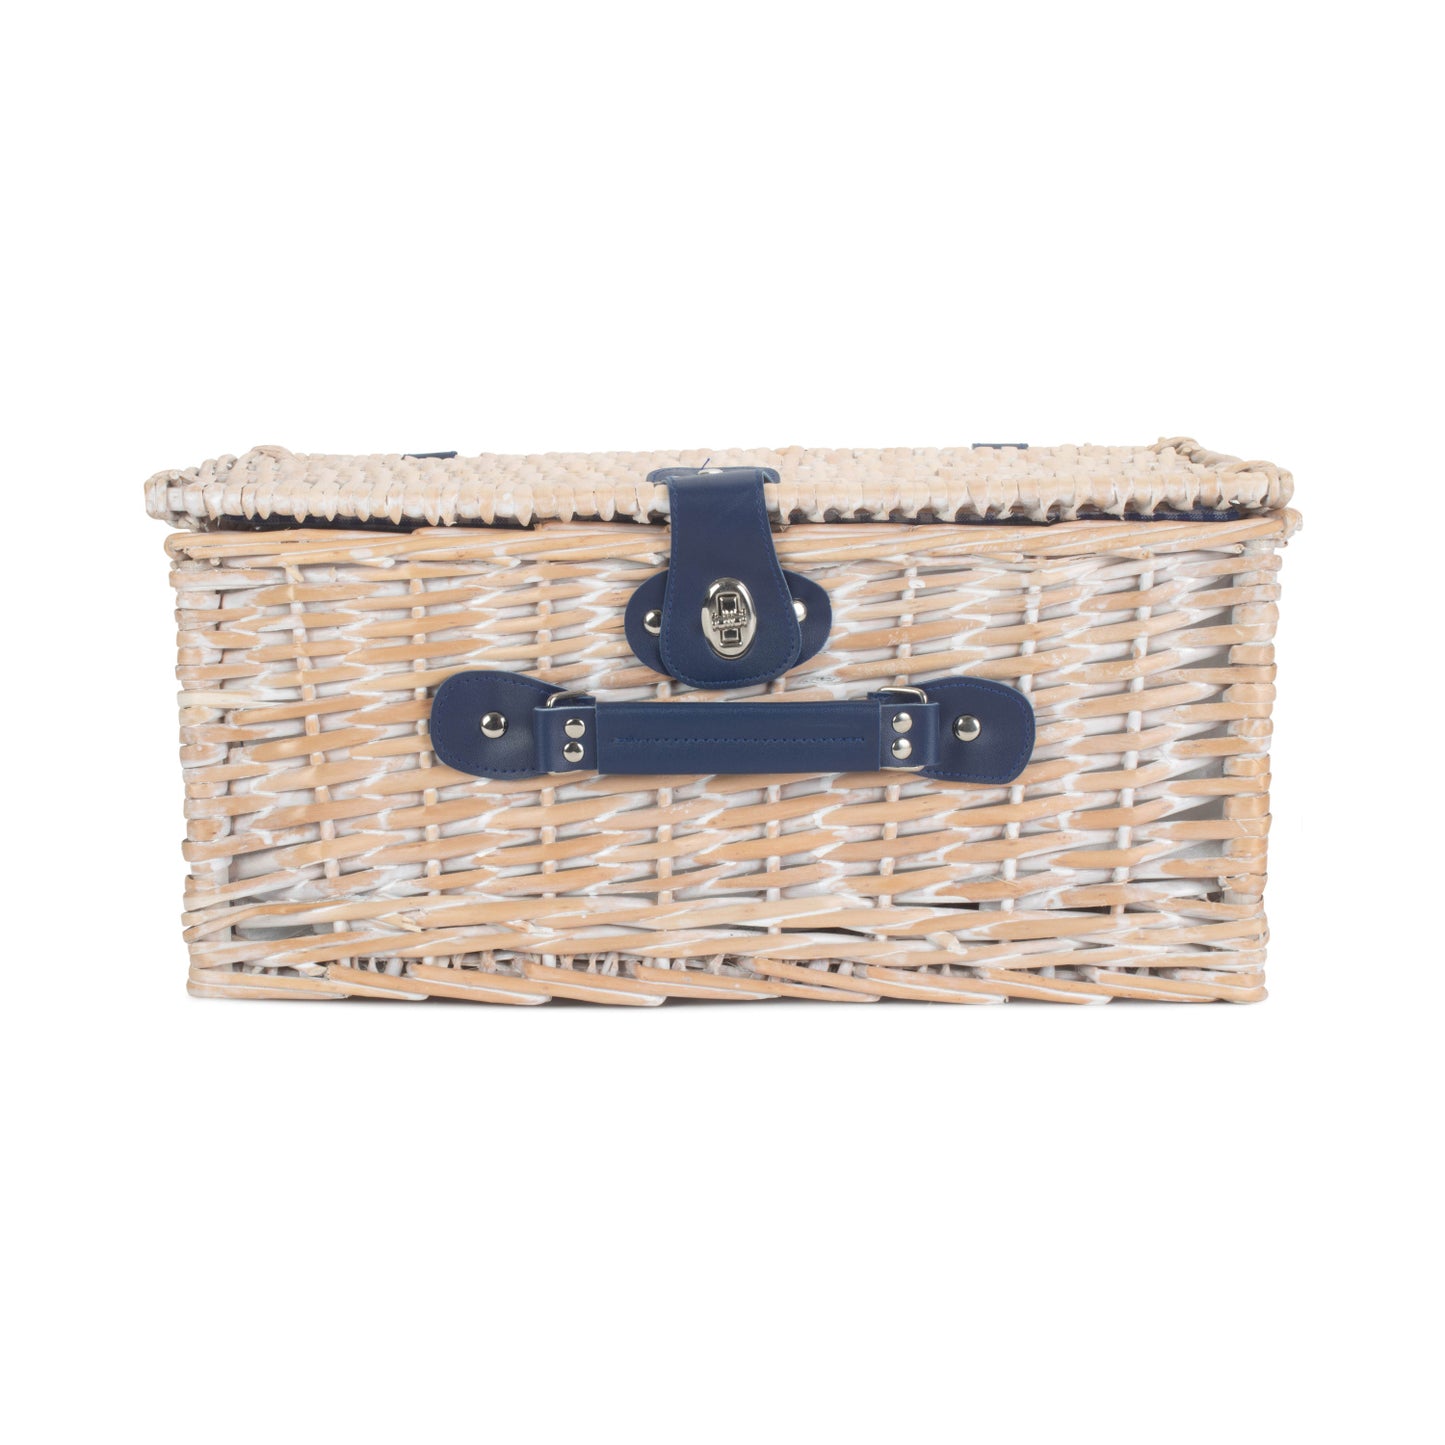 2 Person Blue & White Gingham Fitted Hamper